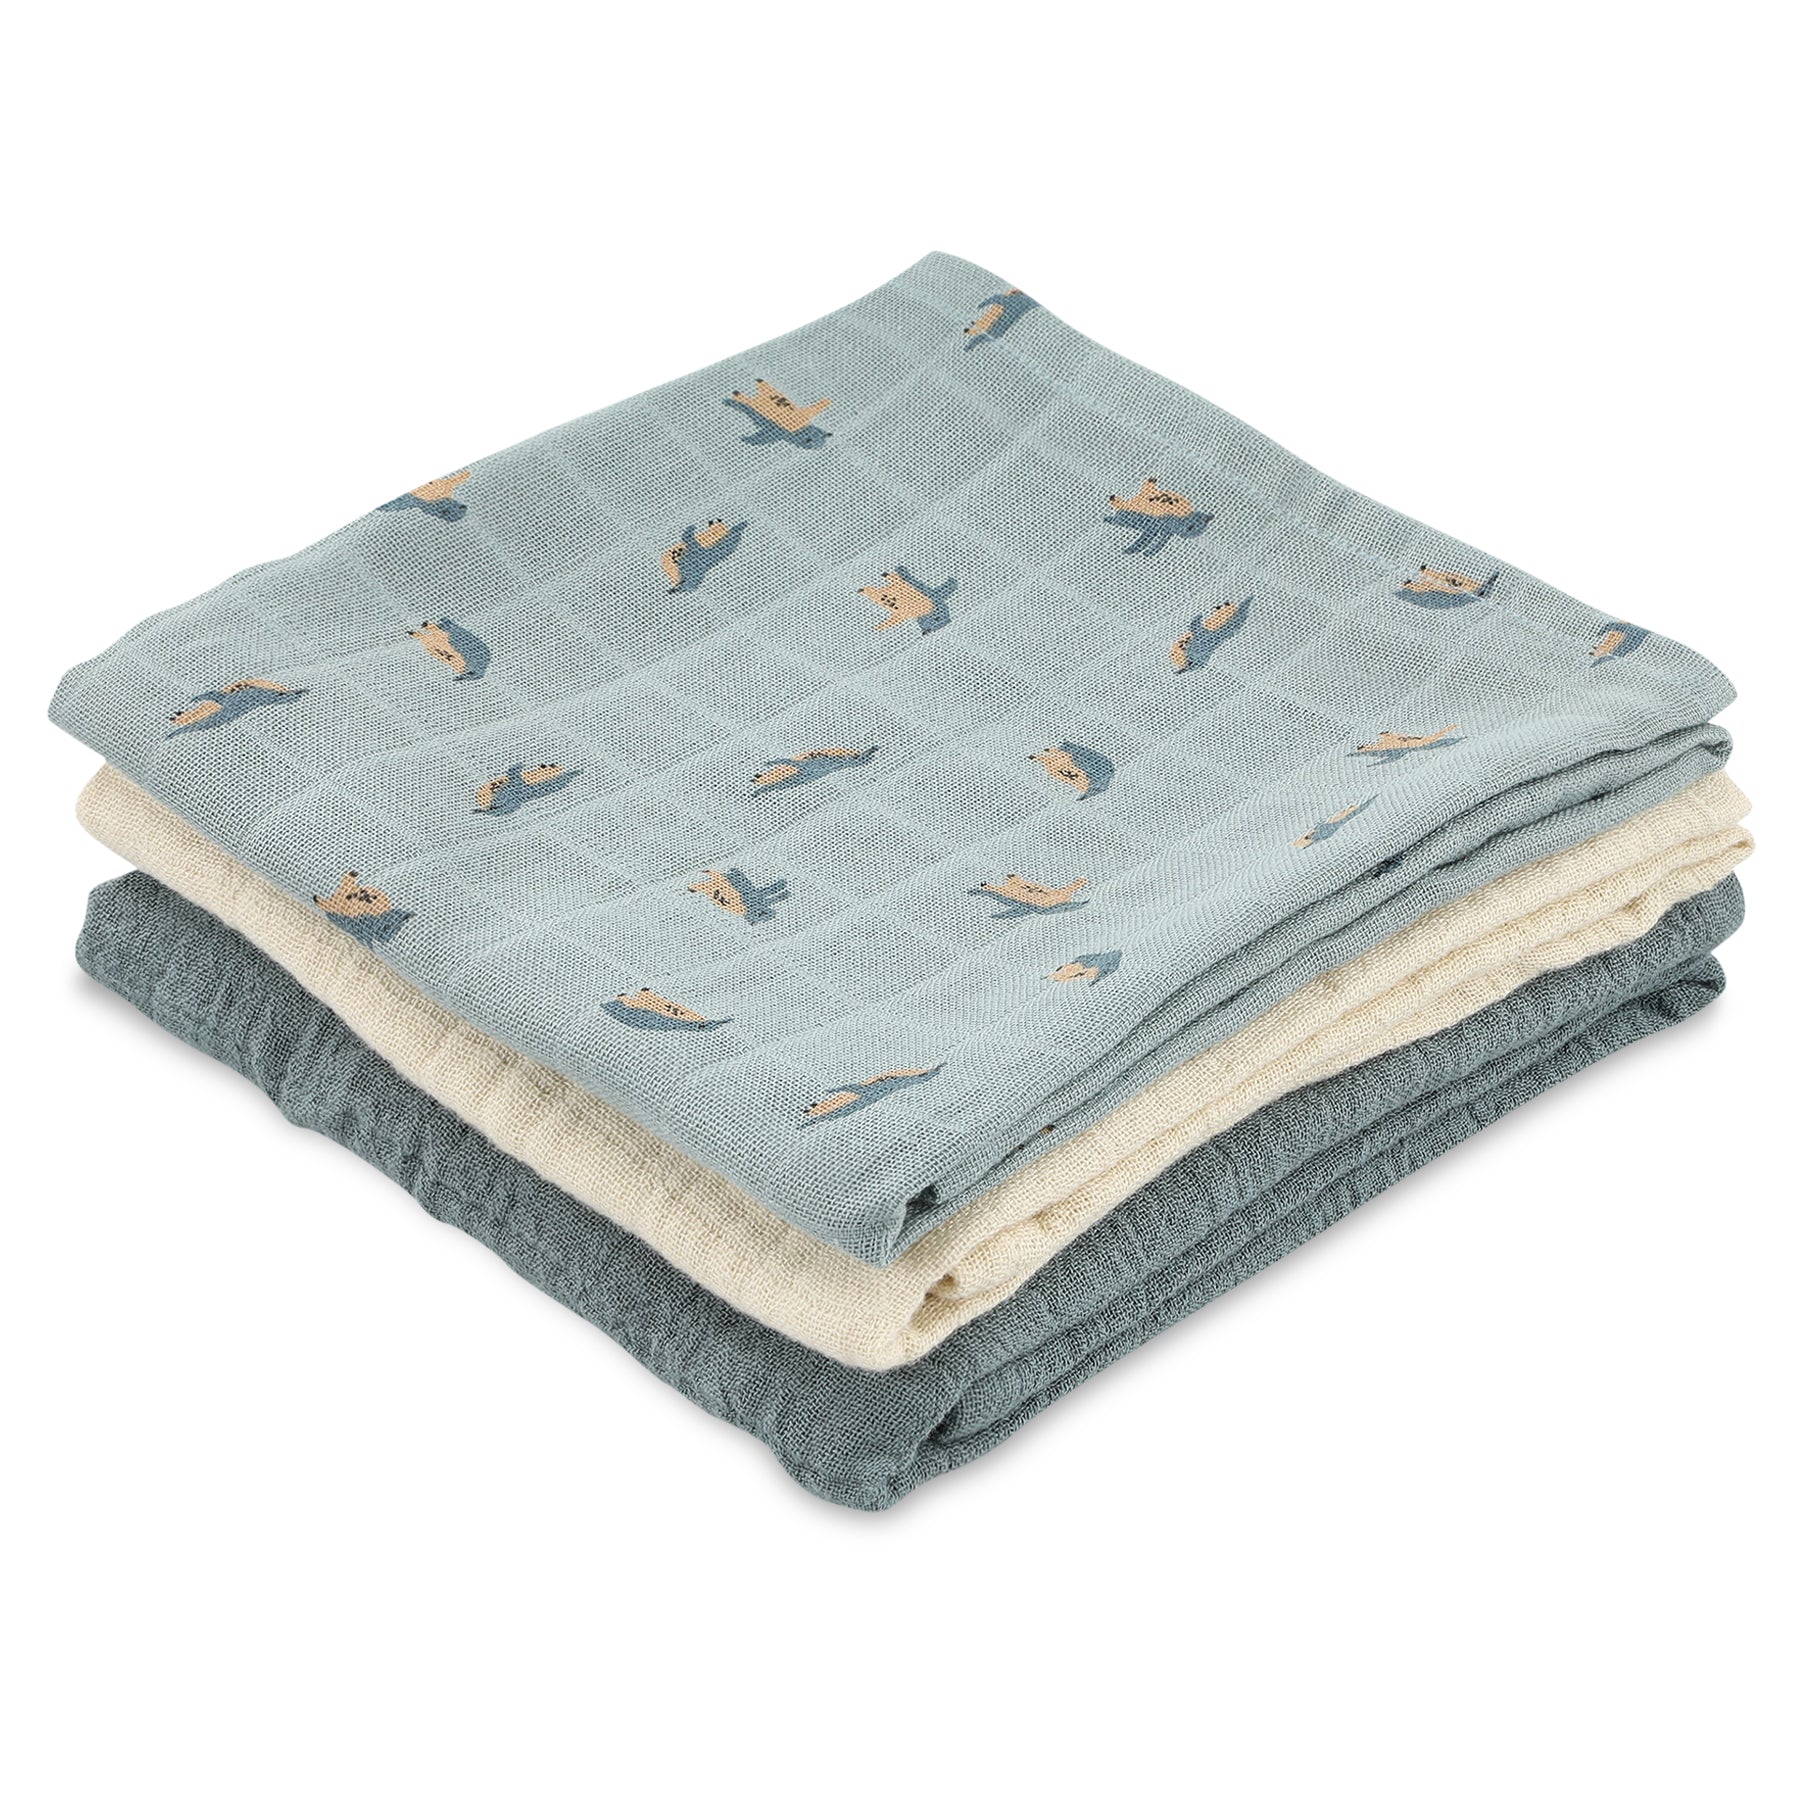 3 pack of blue and cream penguin-themed muslin cloths